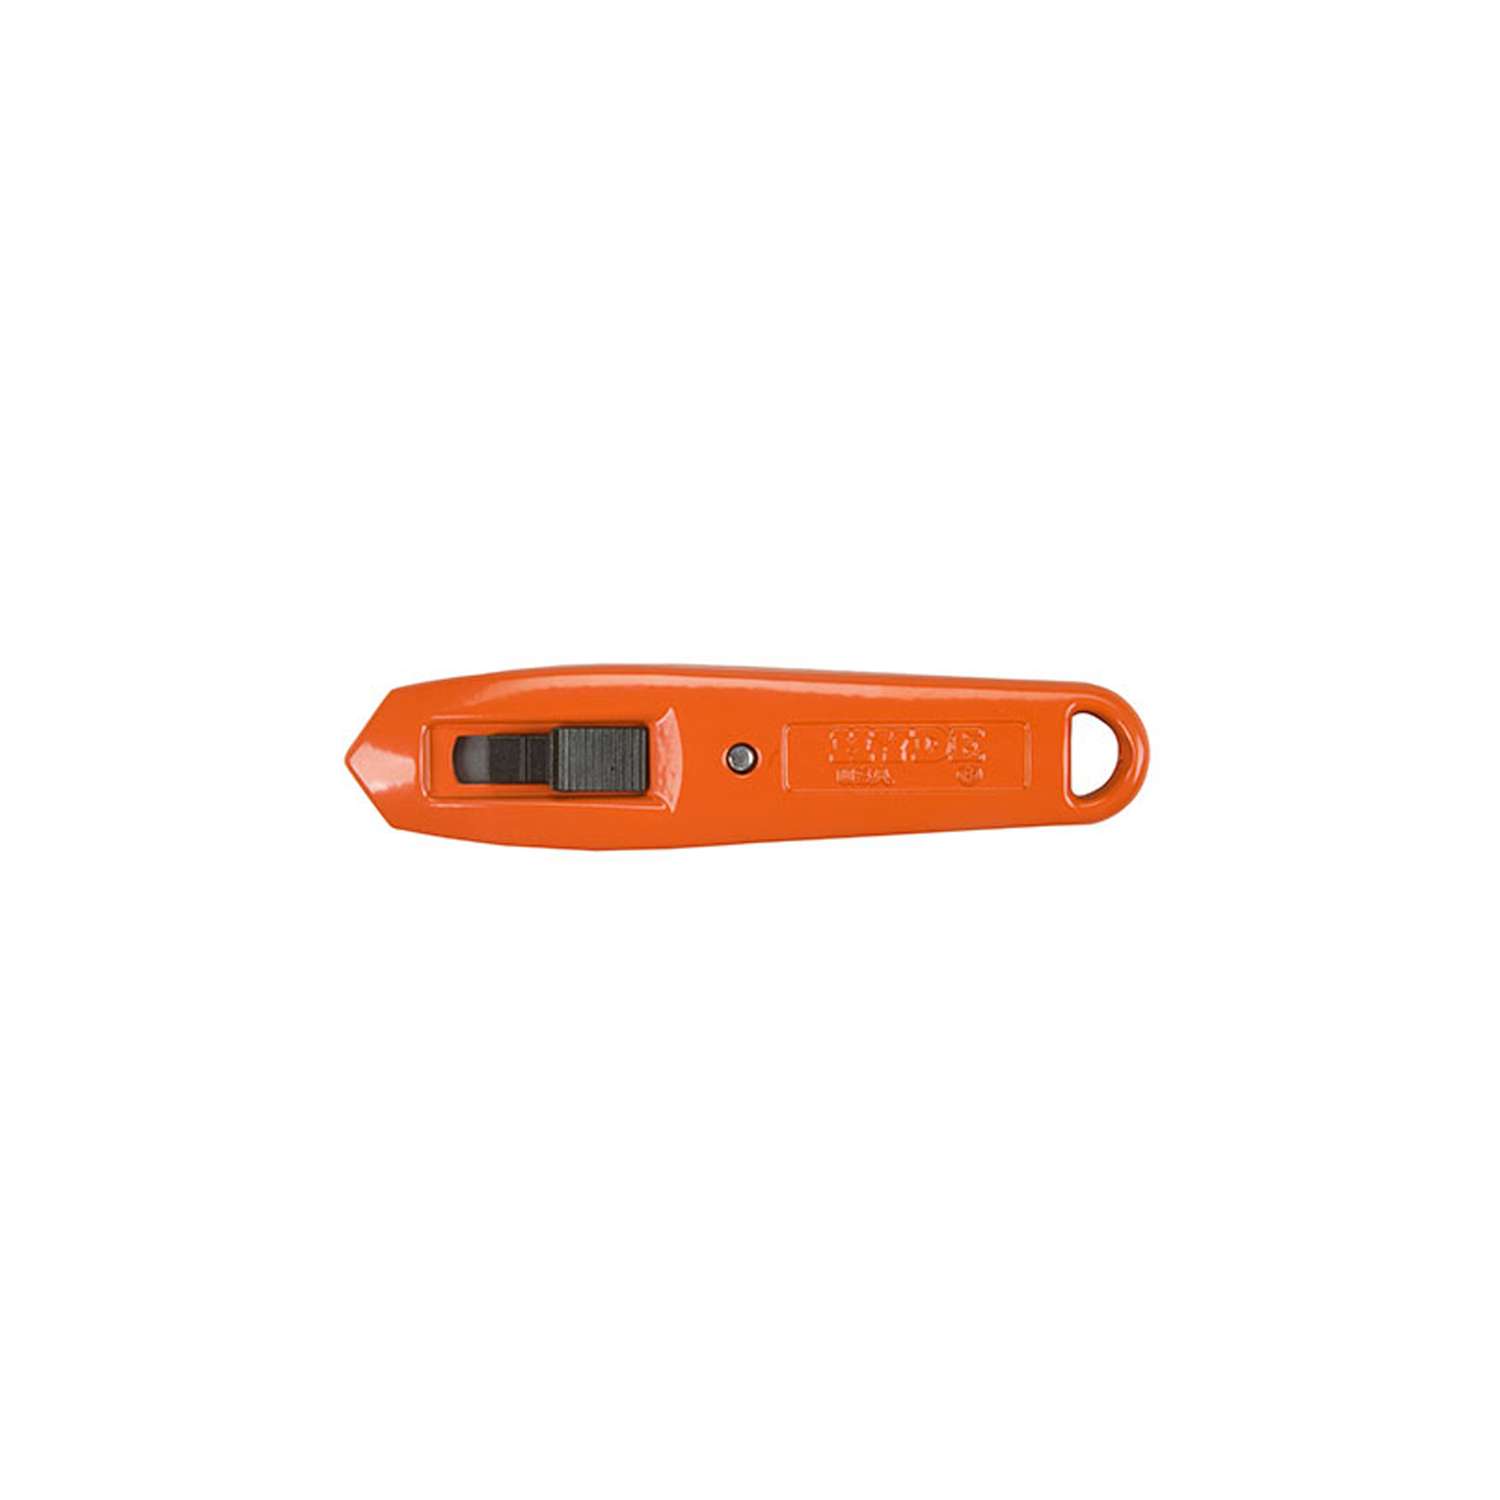 Hyde Tools Insulation Knife, Wind-lock